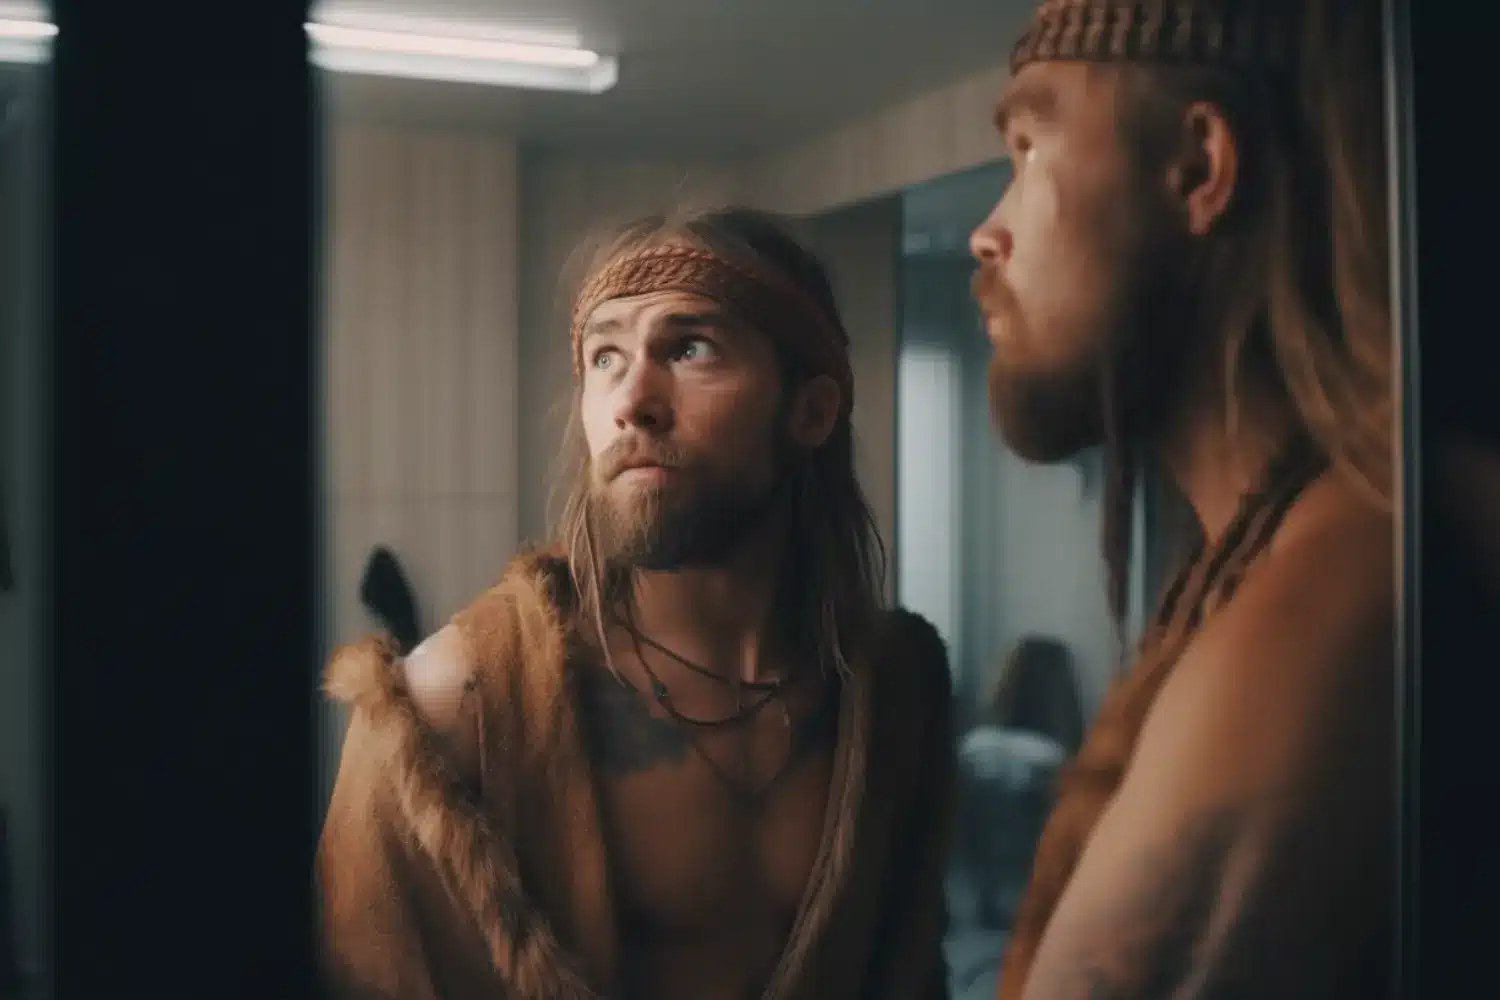 man in caveman outfit looking up away from mirror